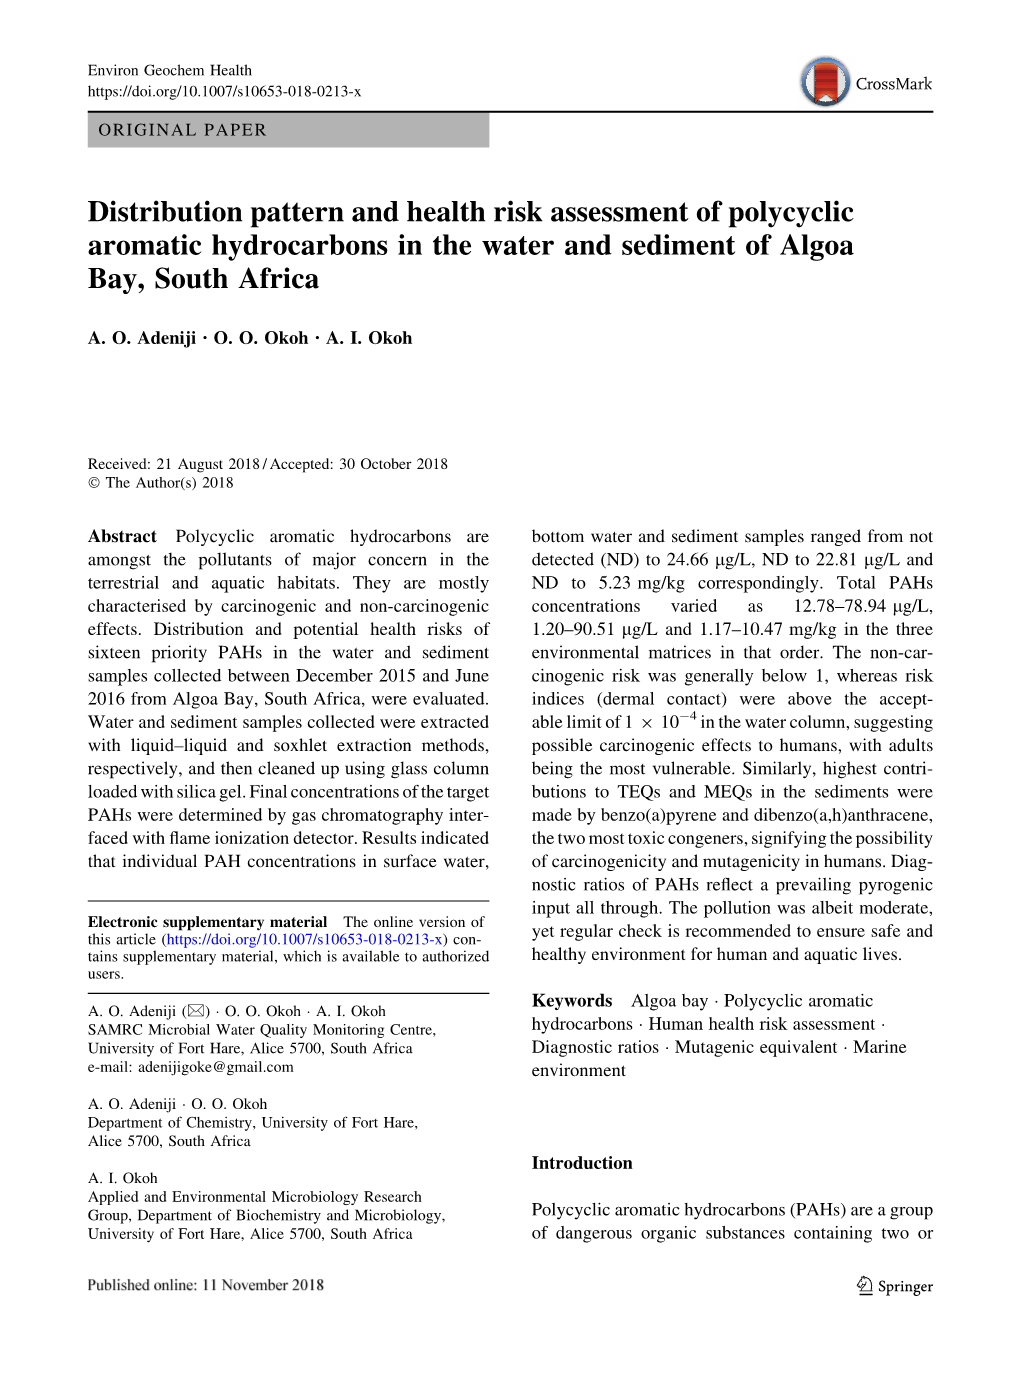 Distribution Pattern and Health Risk Assessment of Polycyclic Aromatic Hydrocarbons in the Water and Sediment of Algoa Bay, South Africa